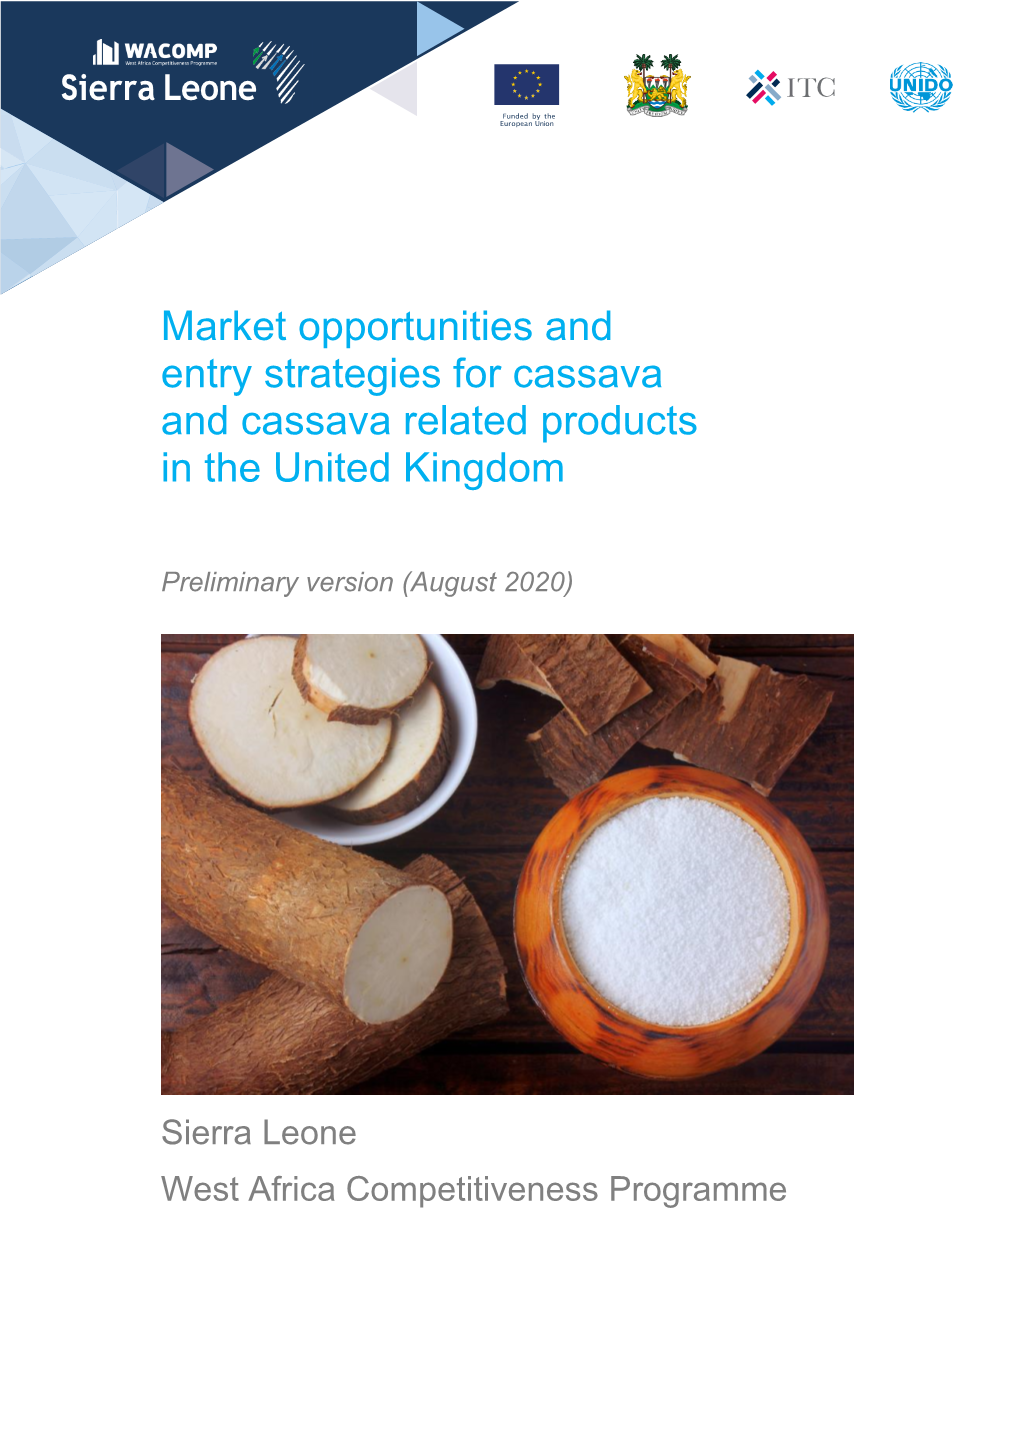 Market Opportunities and Entry Strategies for Cassava and Cassava Related Products in the United Kingdom